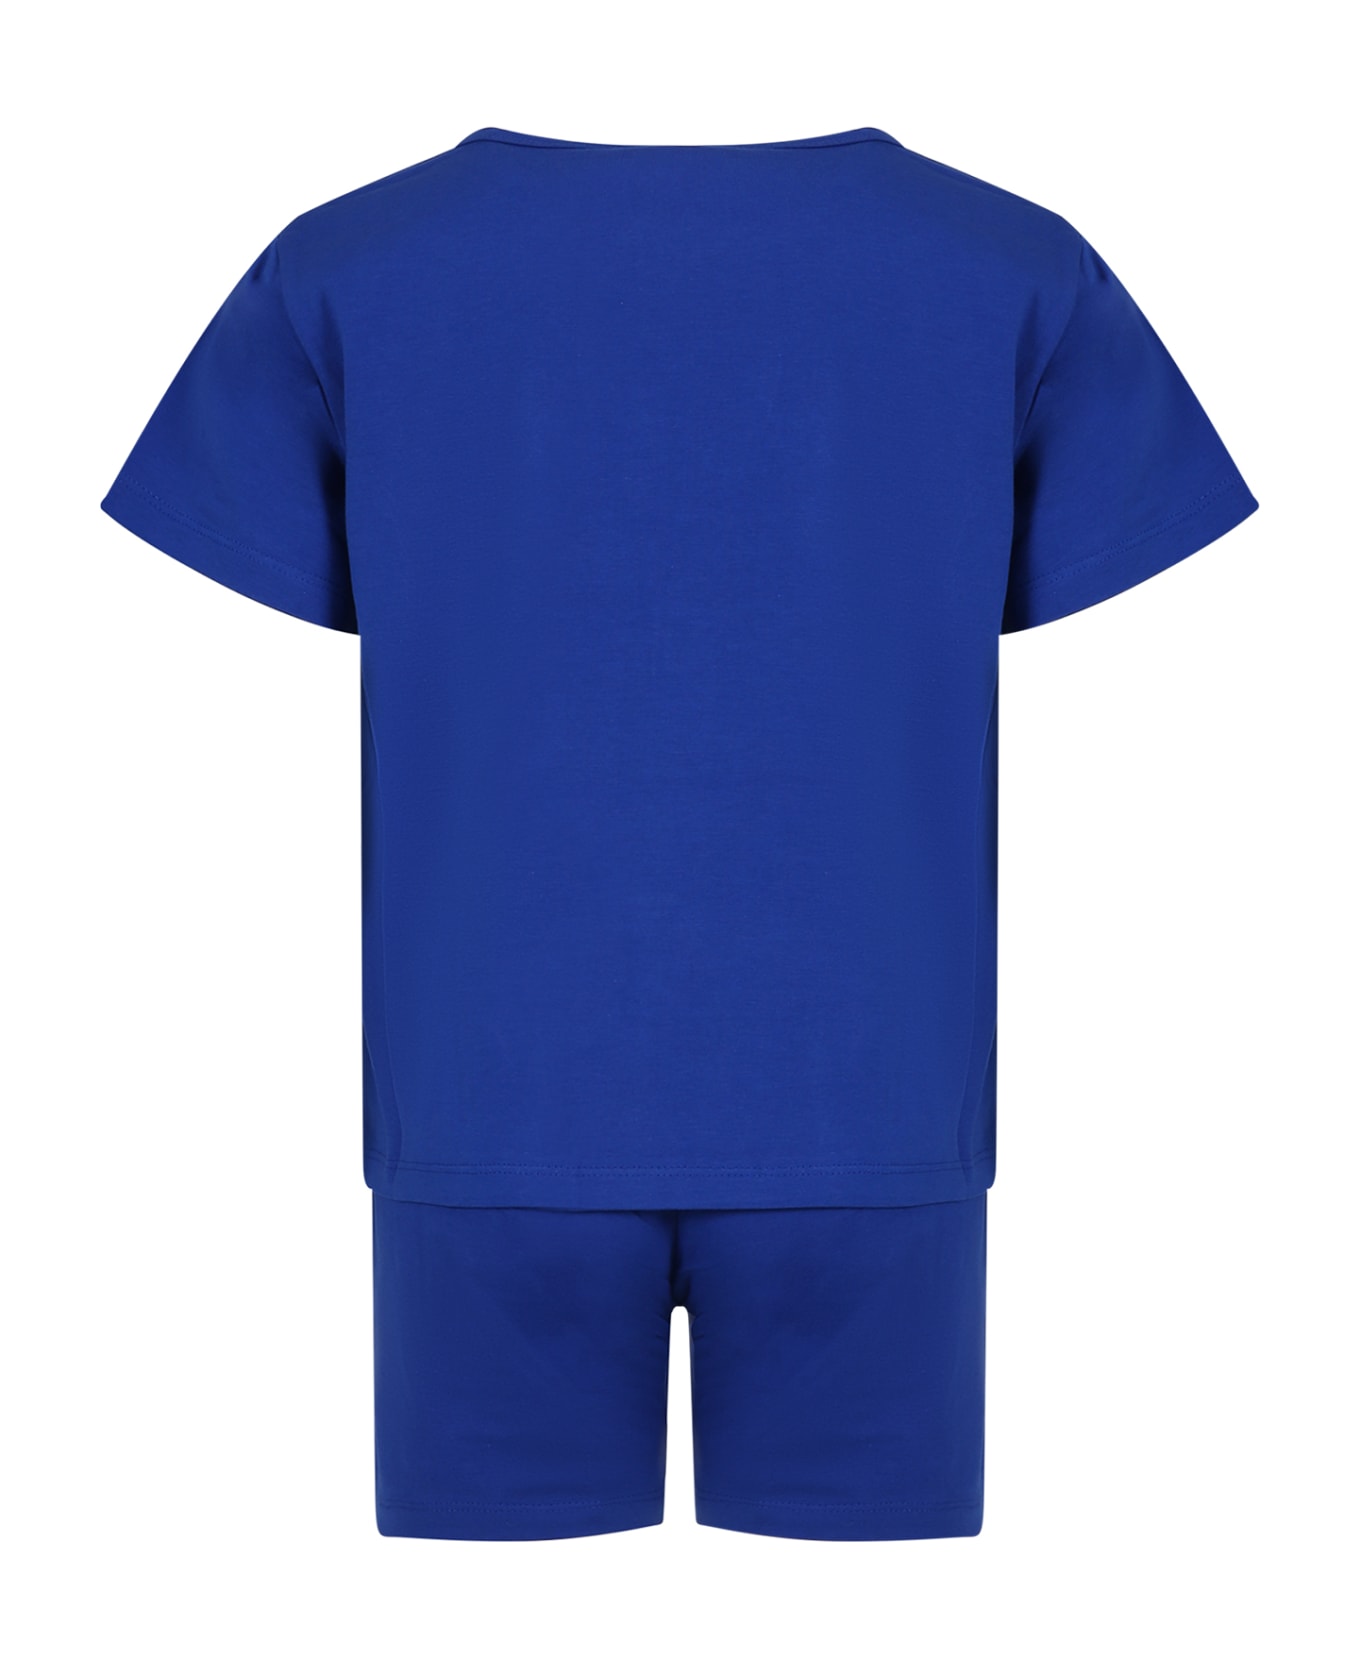 Molo Blue Pajamas For Kids With Smiley - Blue ジャンプスーツ